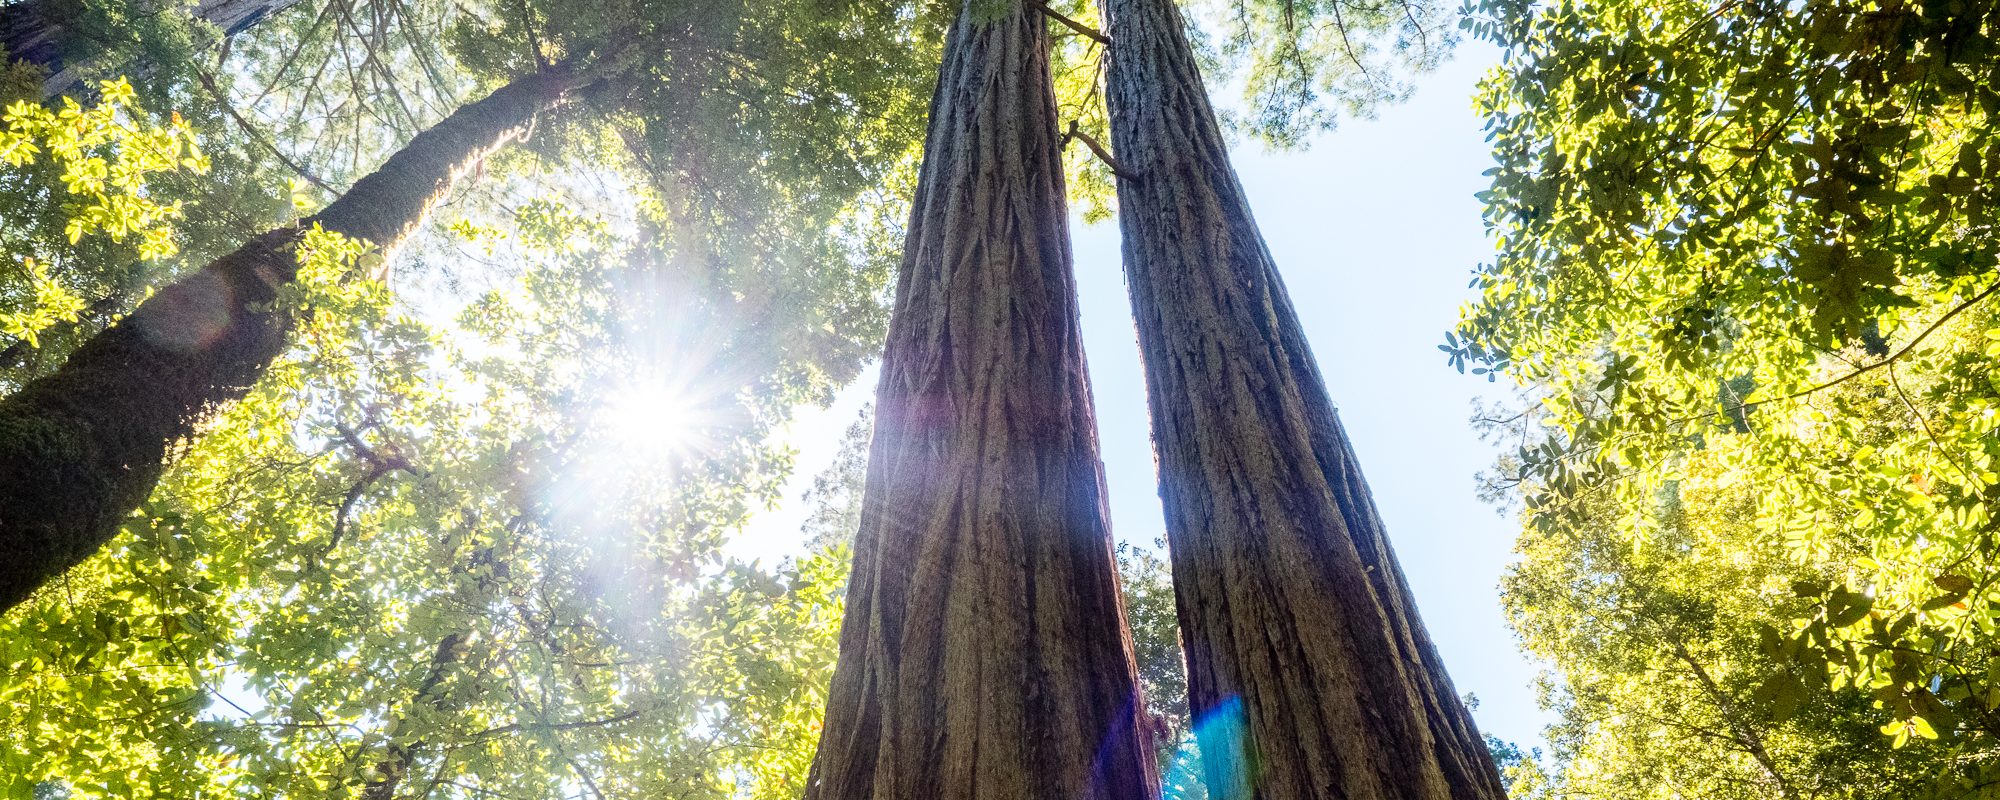 3 Day Itinerary: Redwood National Park with Kids